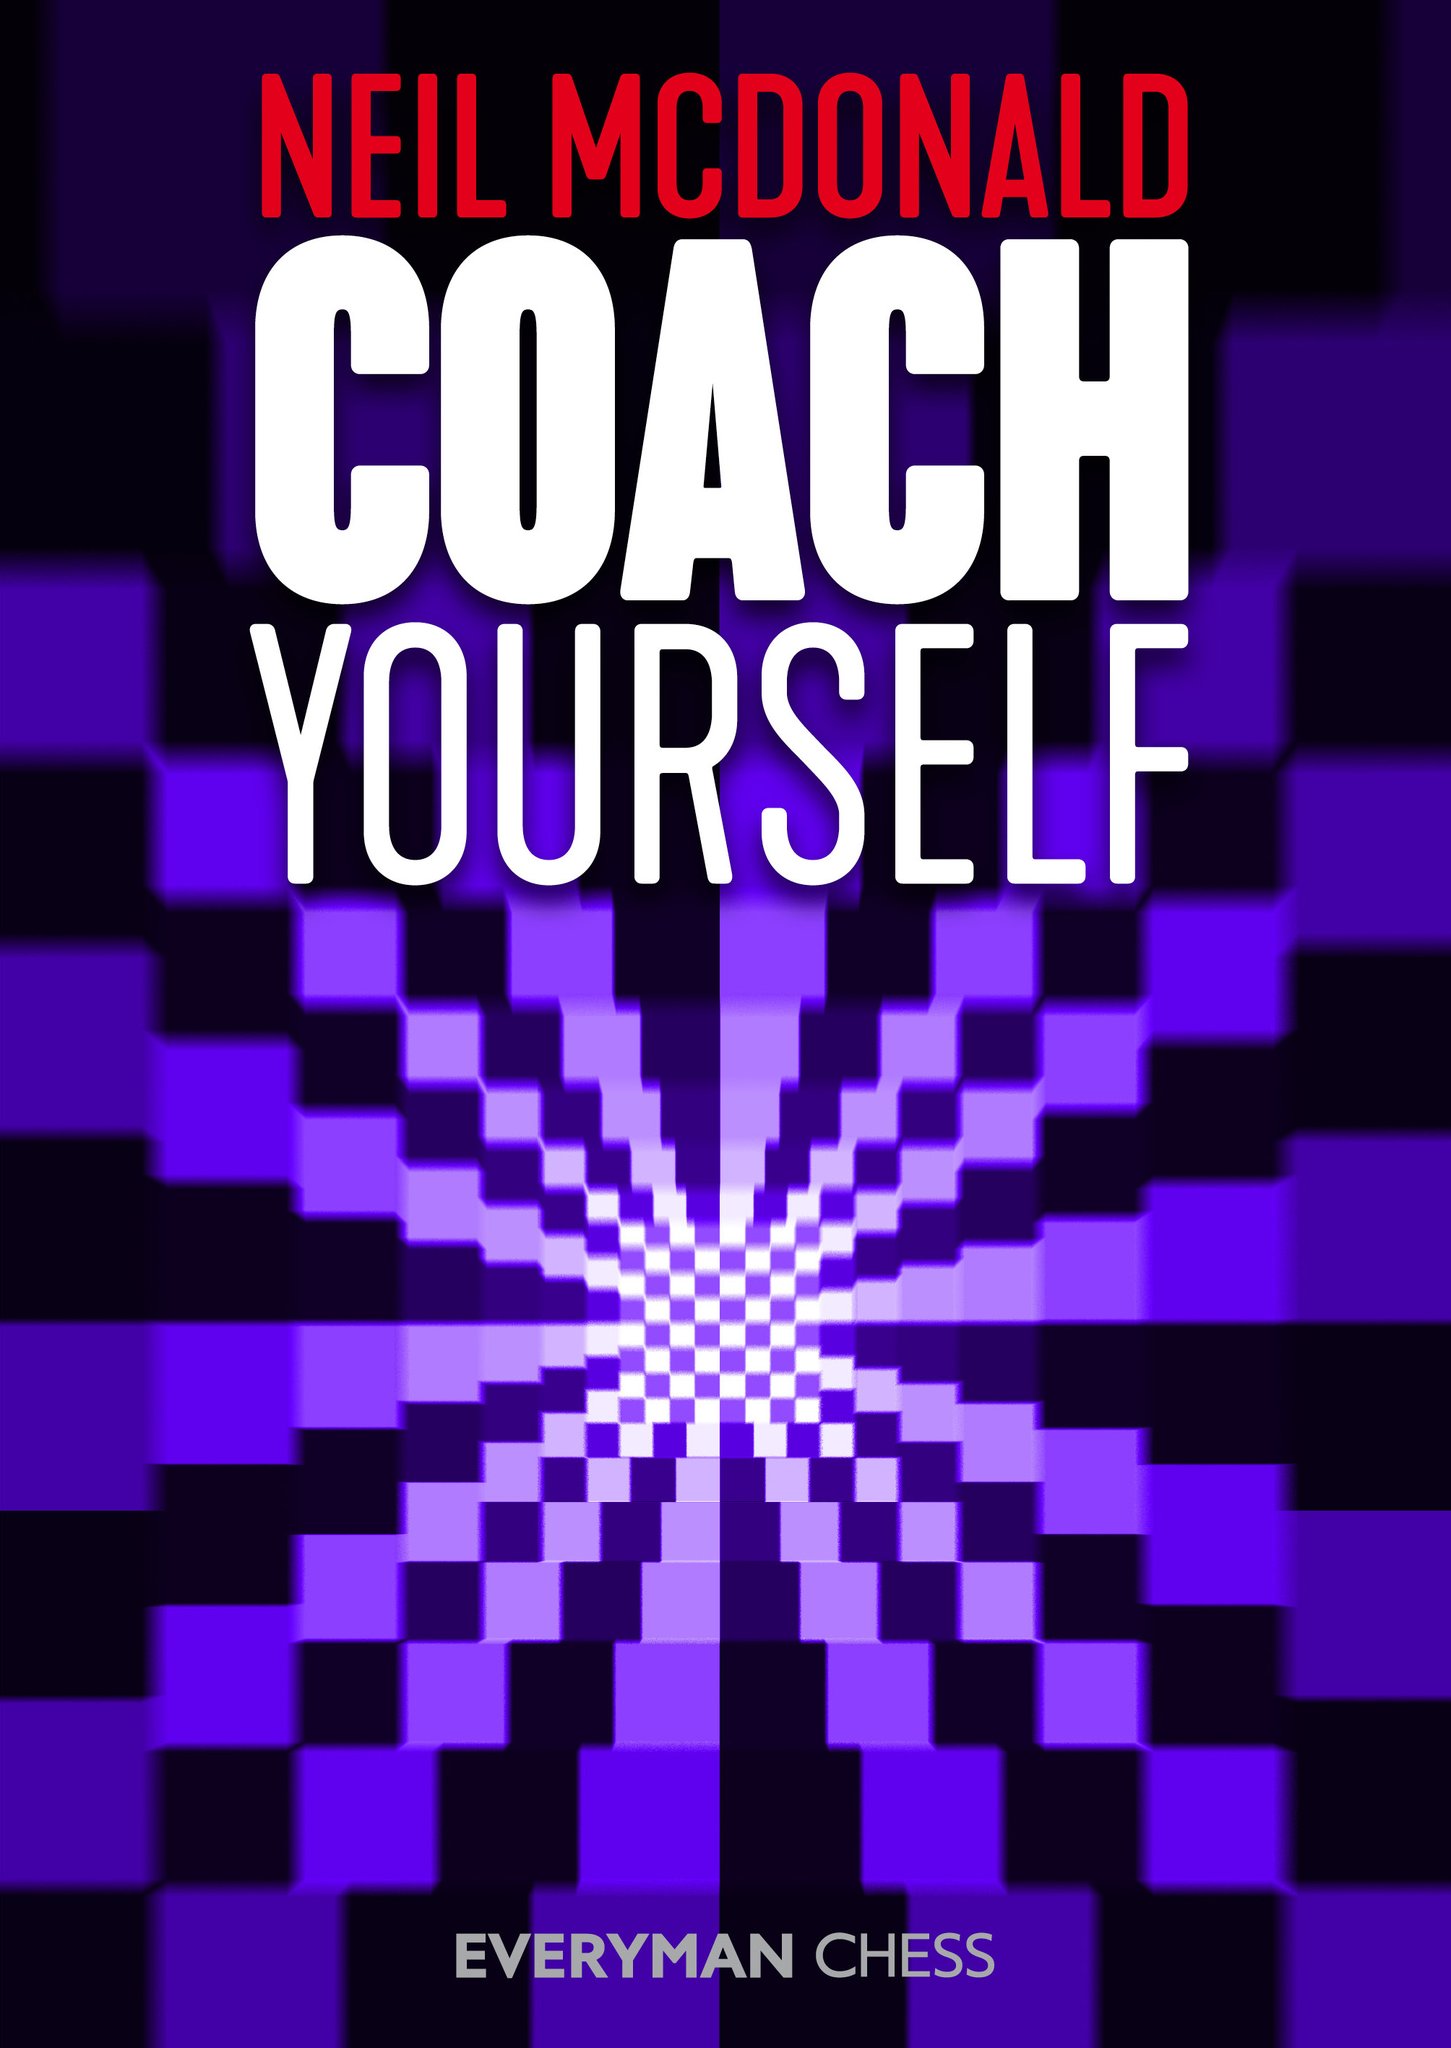 Coach Yourself, A complete Guide to self improvement at chess Neil McDonald, Eceryman Chess, 2019